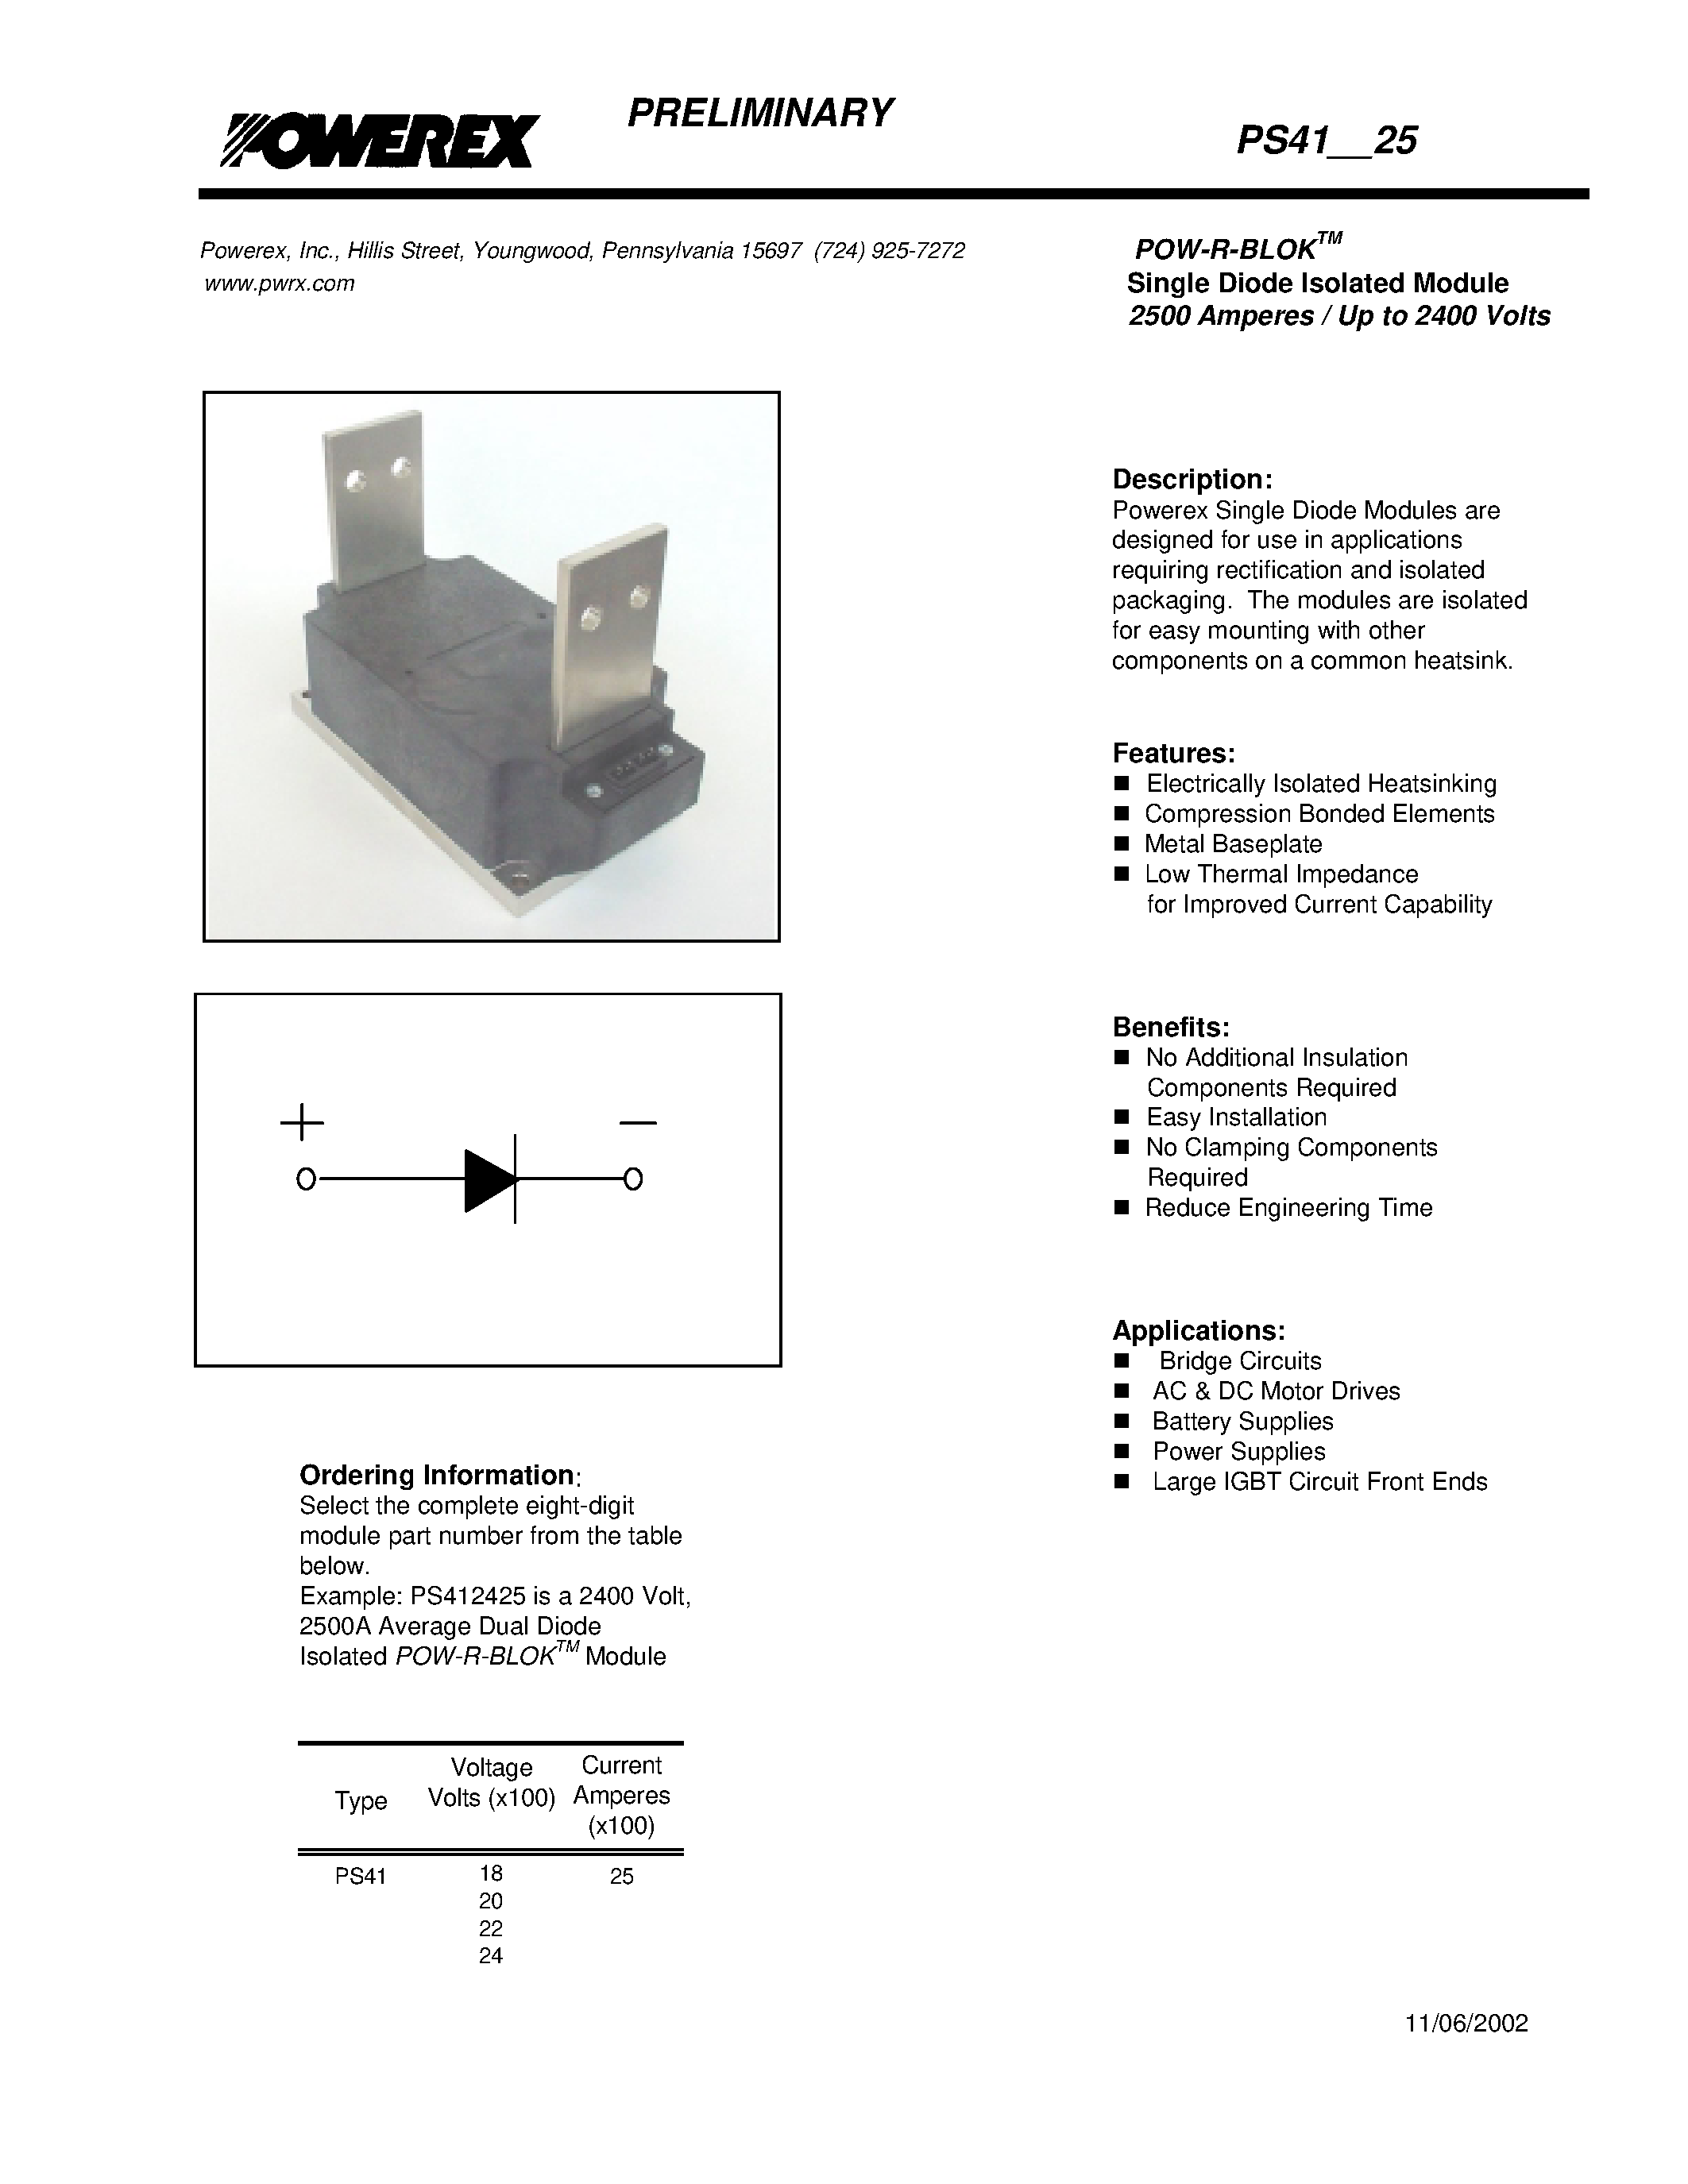 Datasheet PS4125 - POW-R-BLOK Single Diode Isolated Module (2500 Amperes / Up to 2400 Volts) page 1